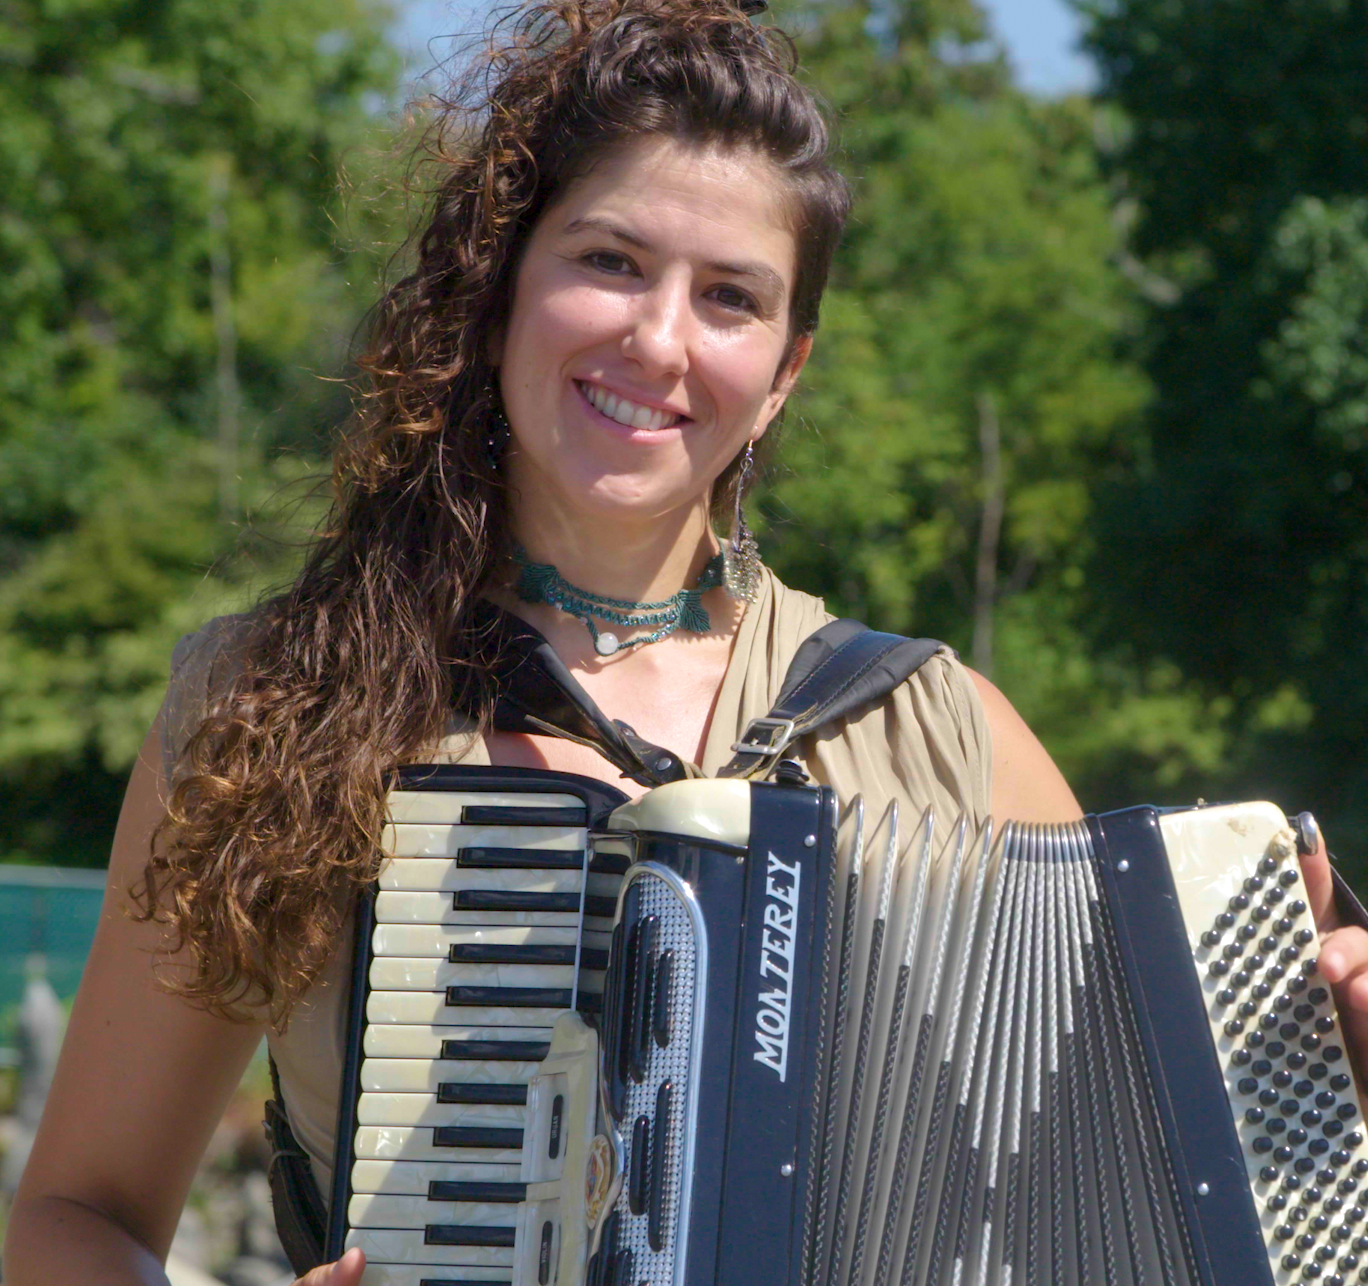 Eleanor has long curly brown hair. She holds an accordian and smiles at the camera